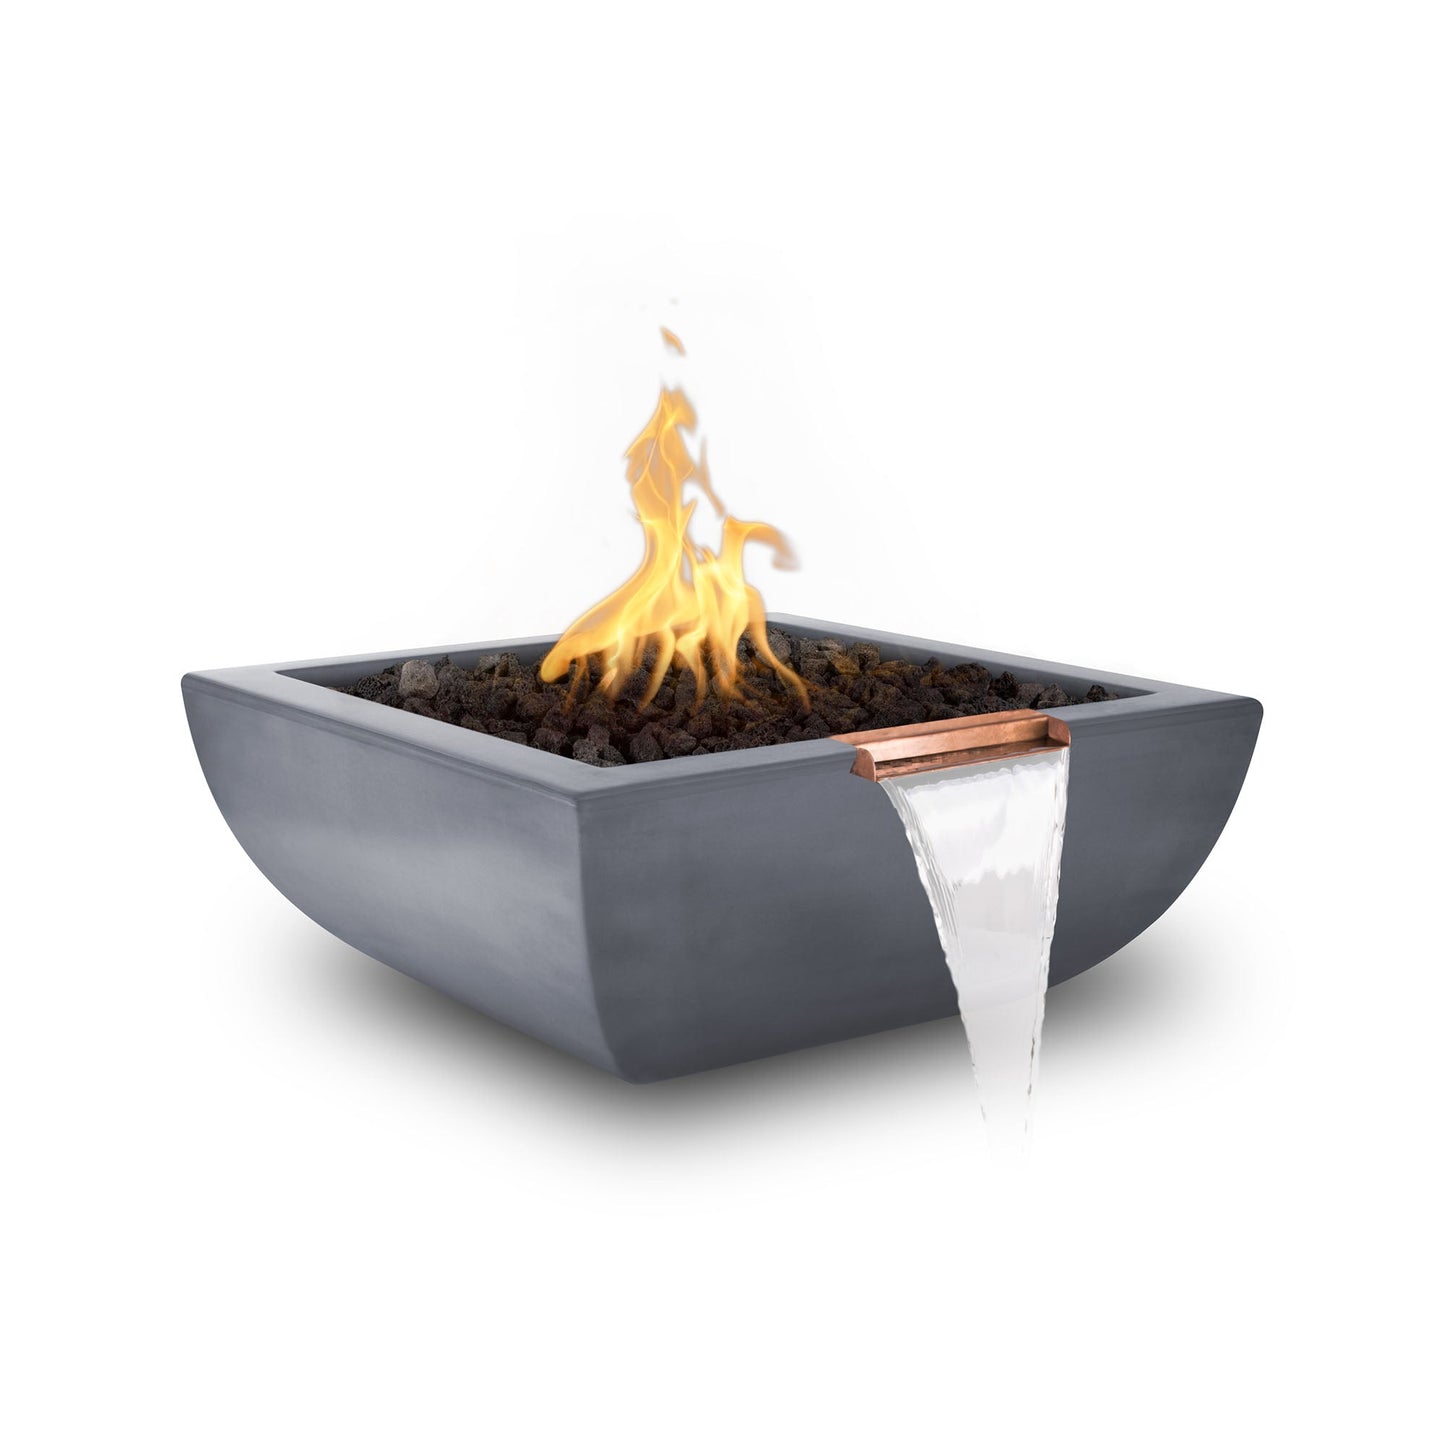 The Outdoor Plus Square Avalon 30" Metallic Copper GFRC Concrete Natural Gas Fire & Water Bowl with Match Lit with Flame Sense Ignition